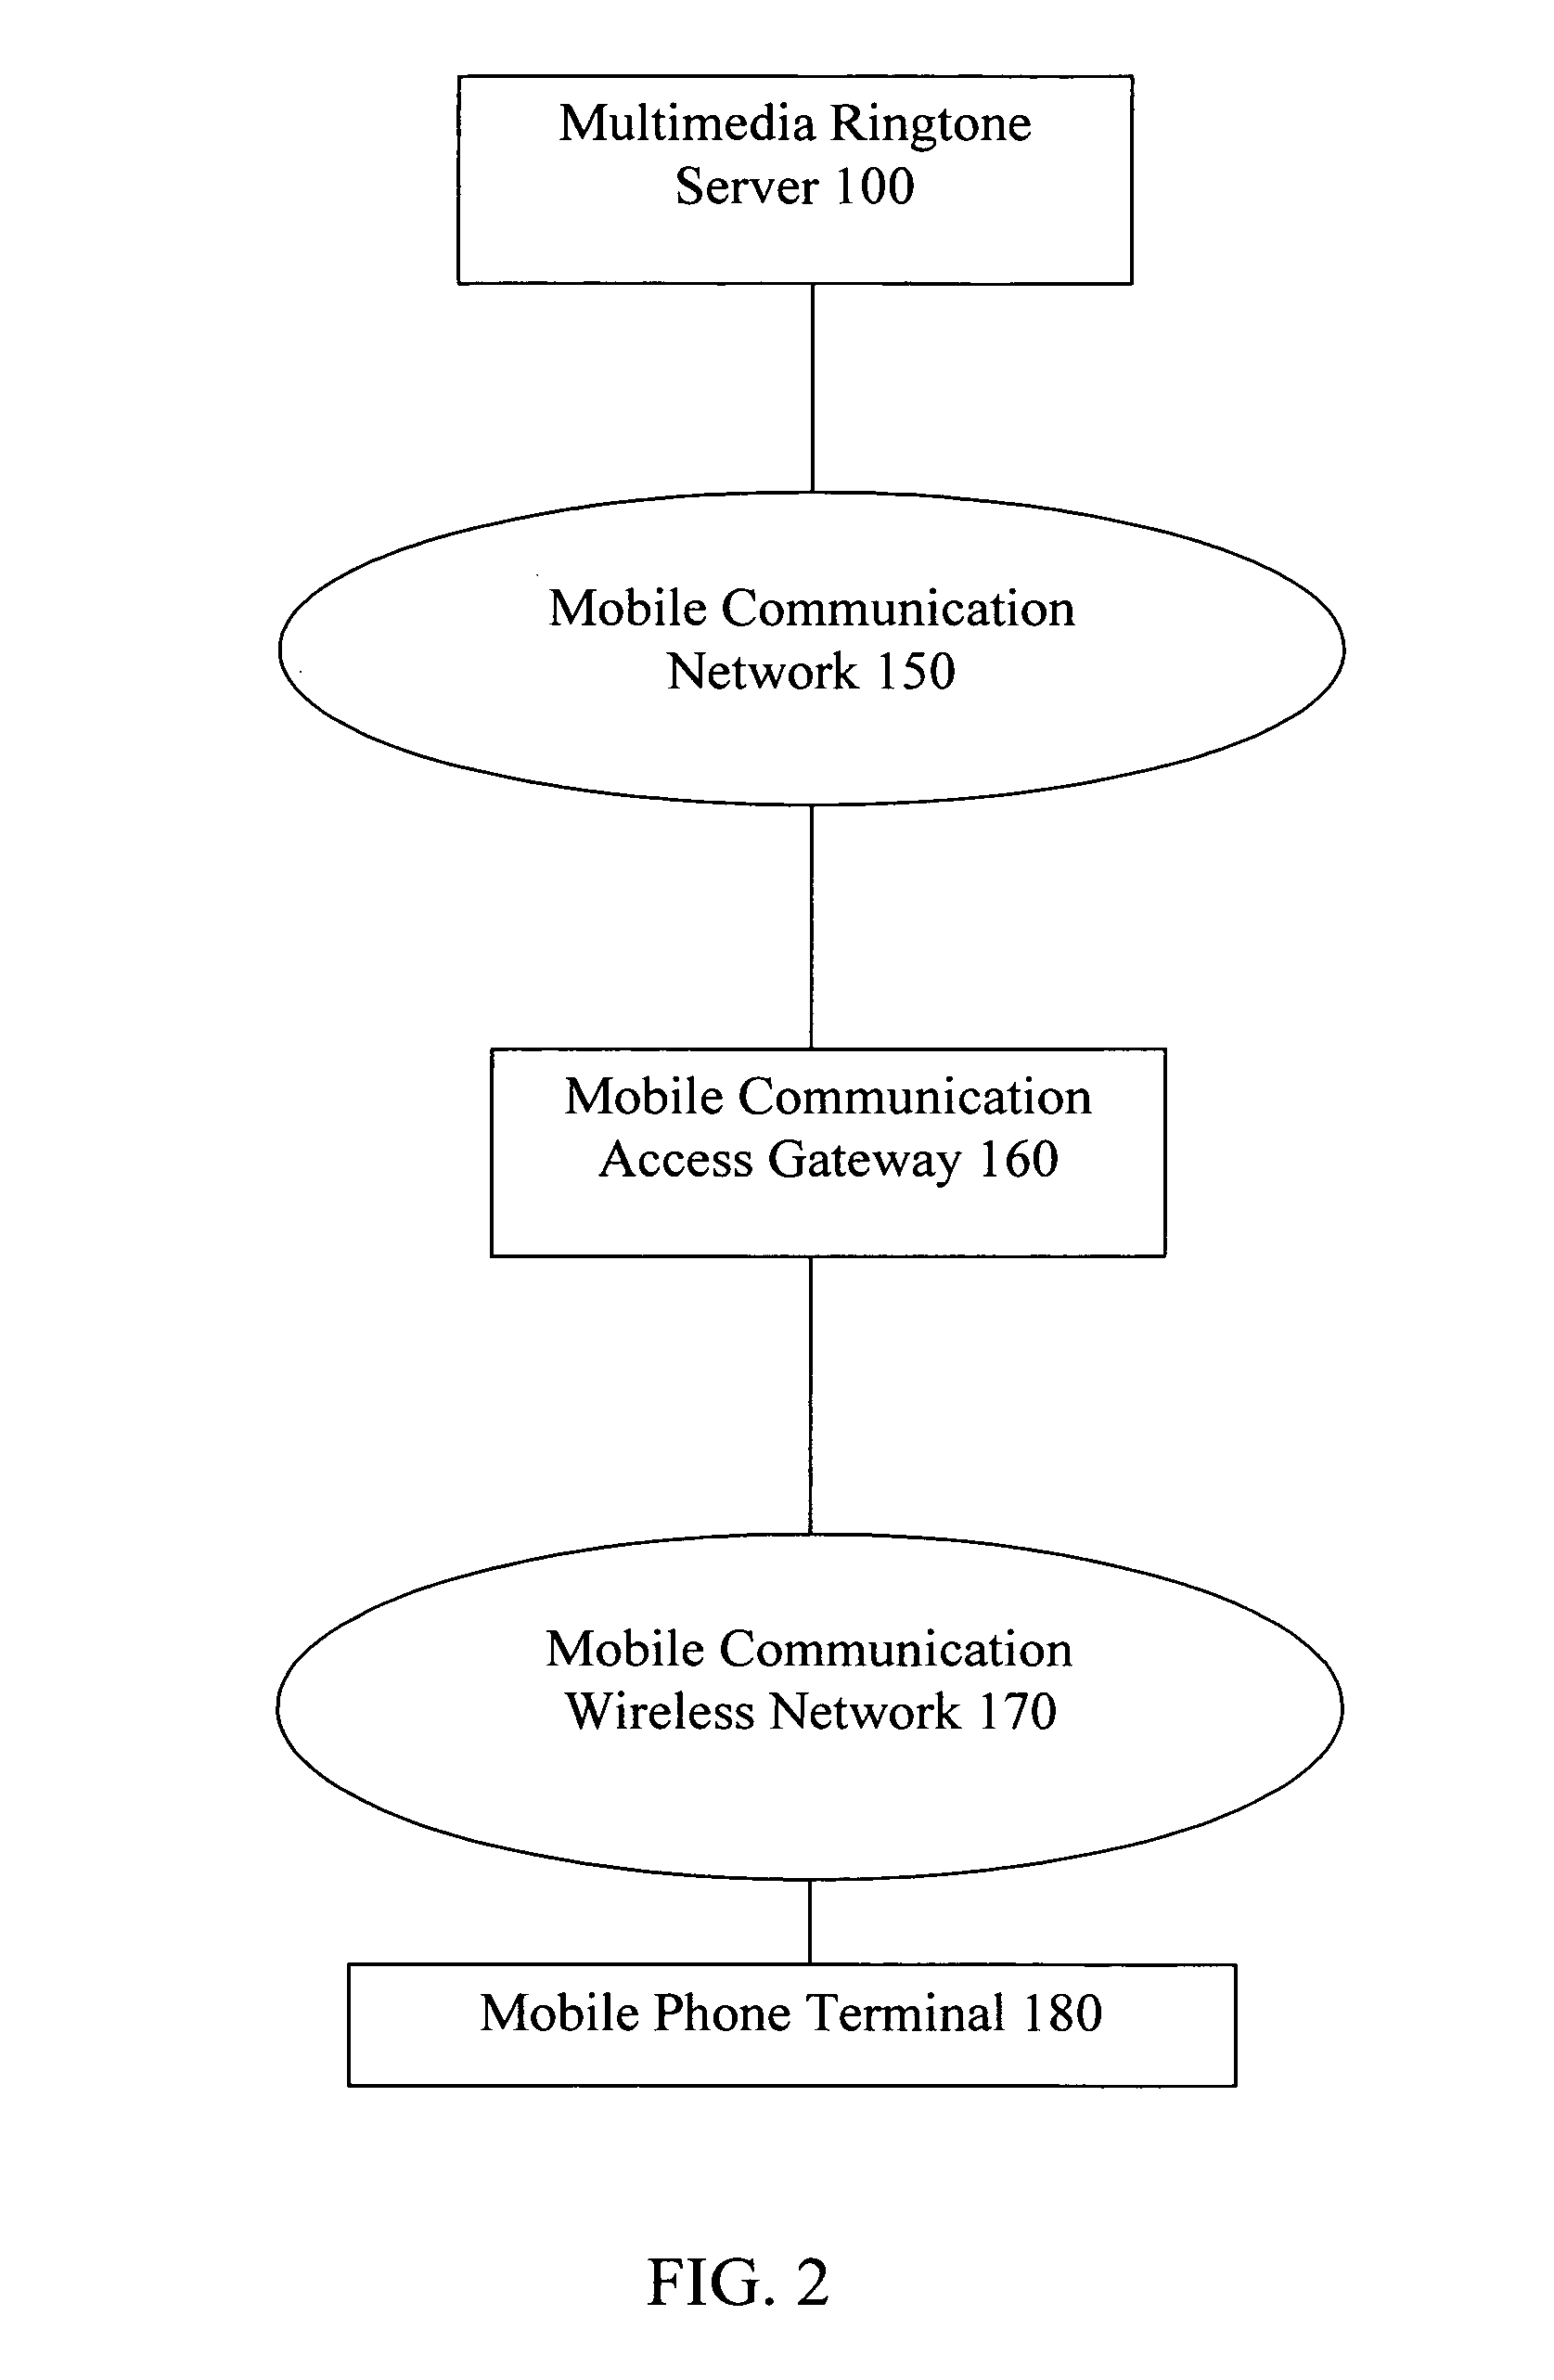 System, method and implementation of providing dynamic multi-media ringtone to called party prior to answer a call